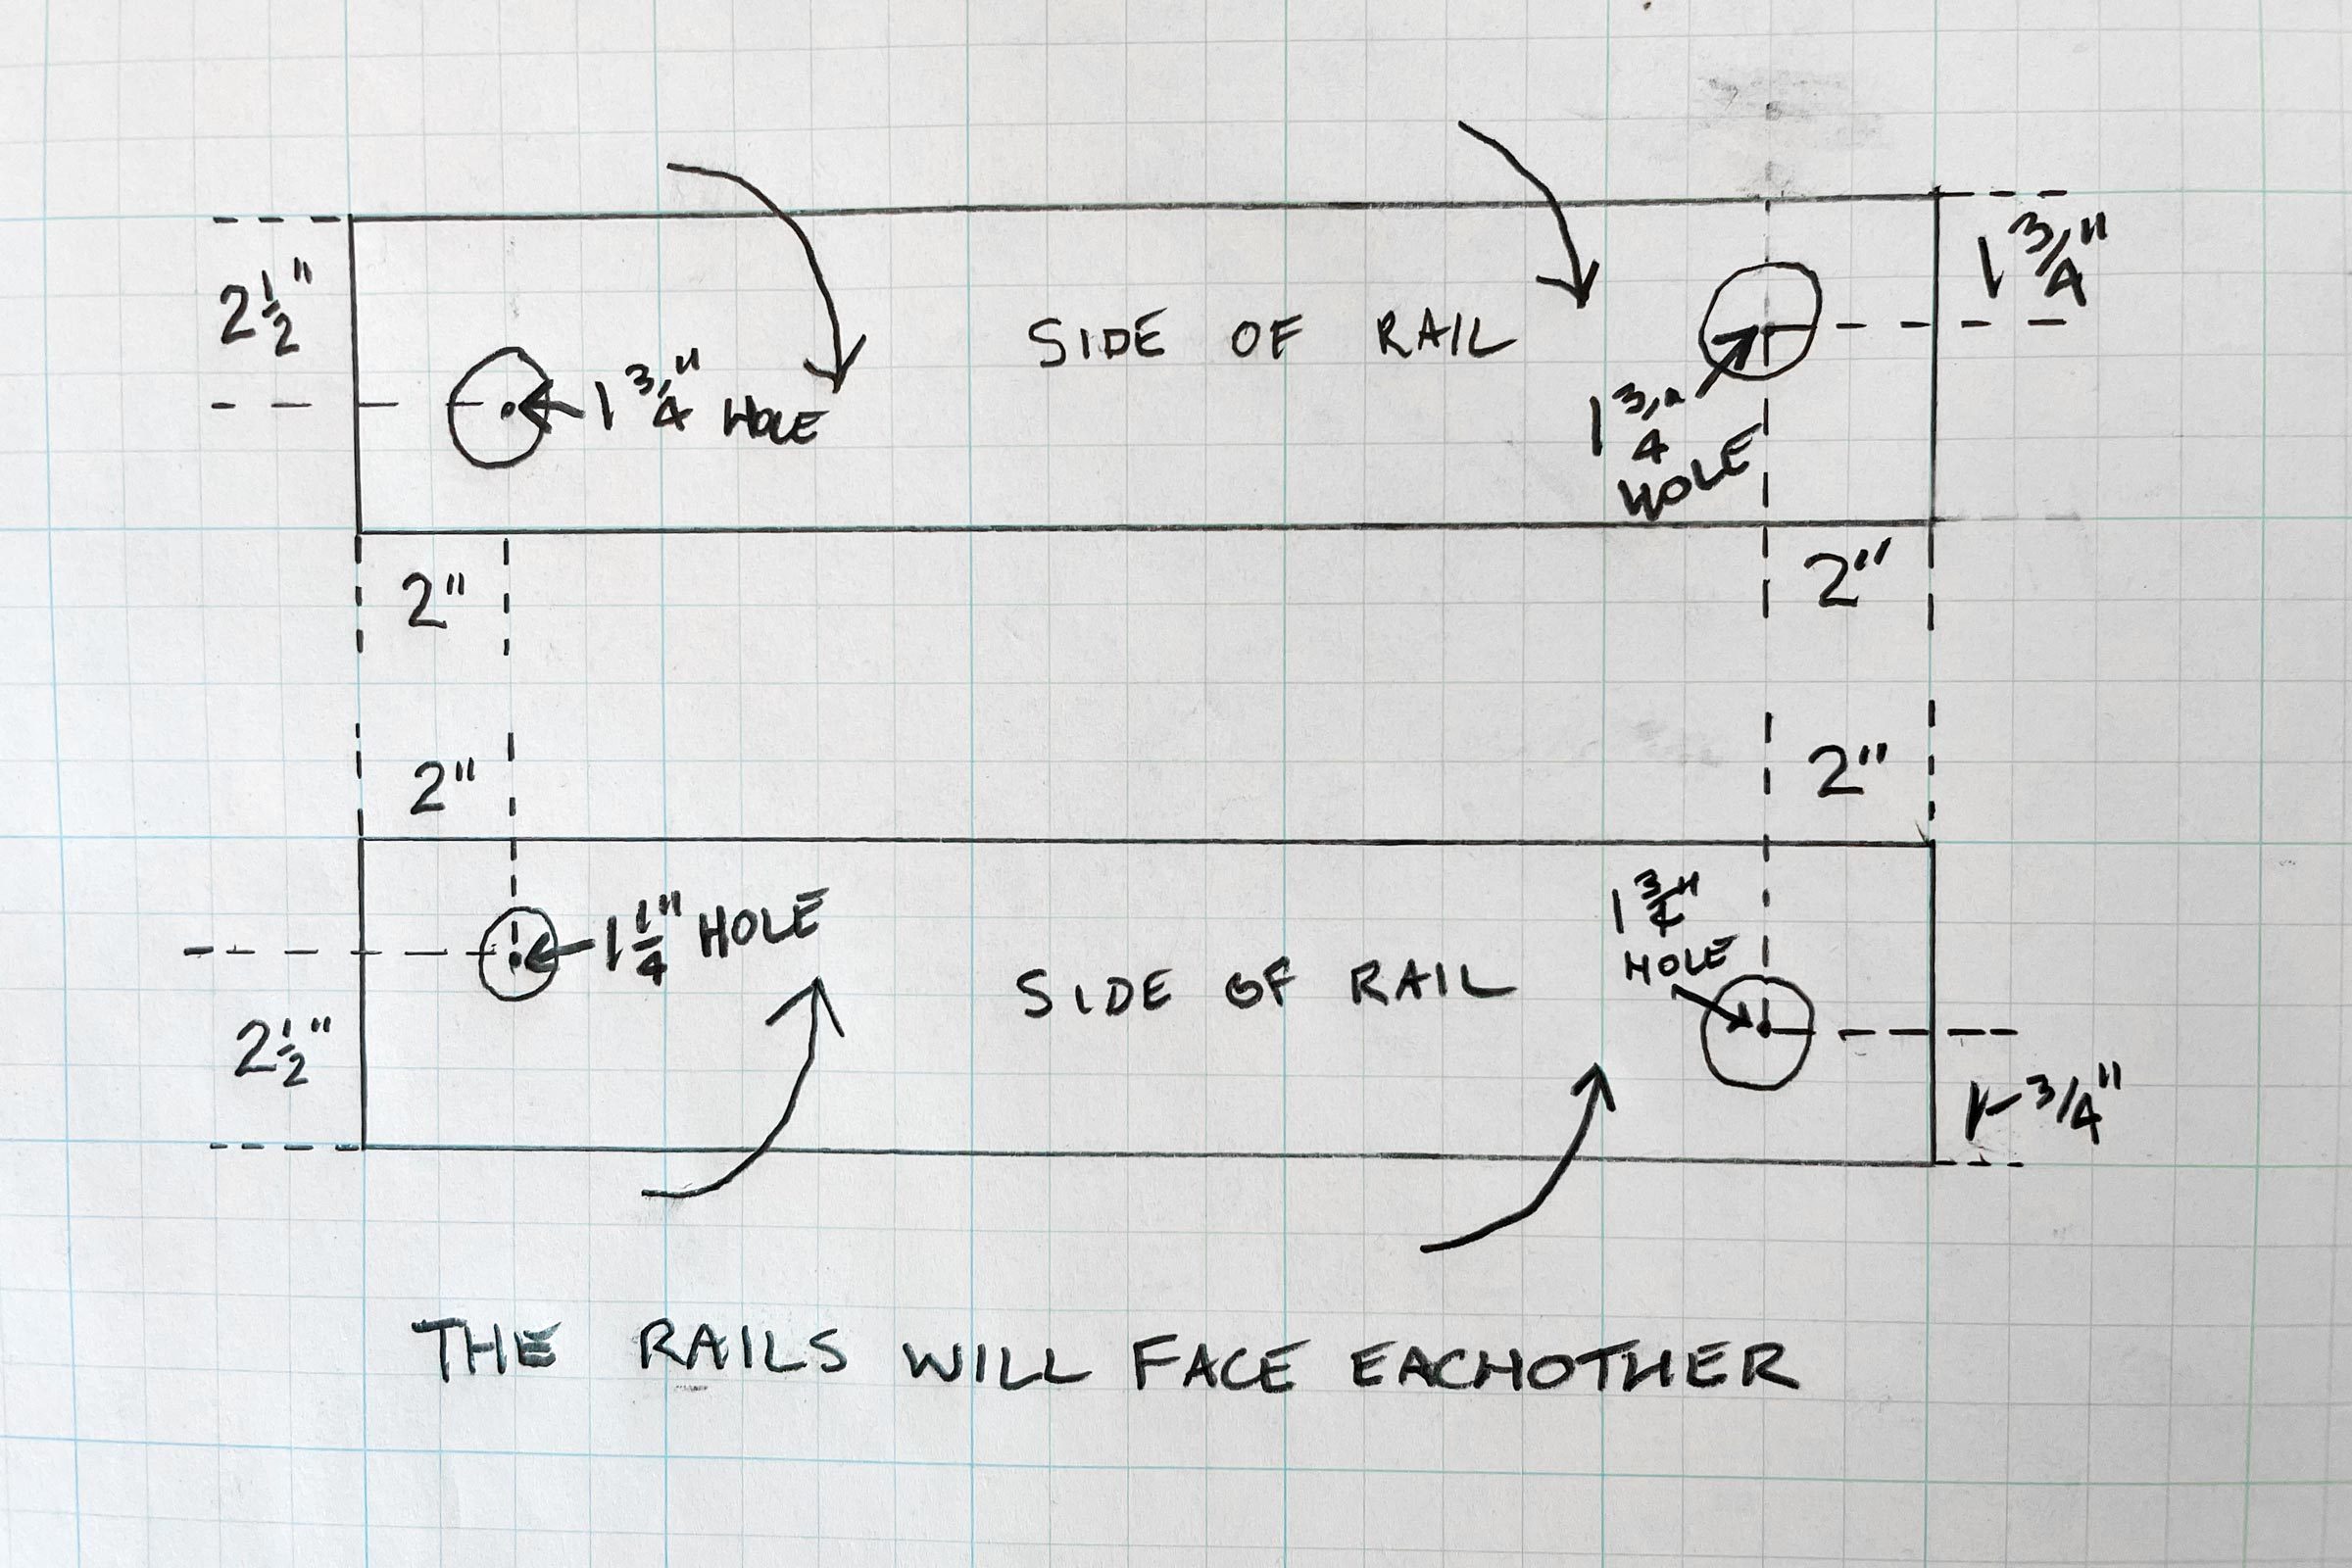 diagram drawn out on lined paper explaining where to drill holes